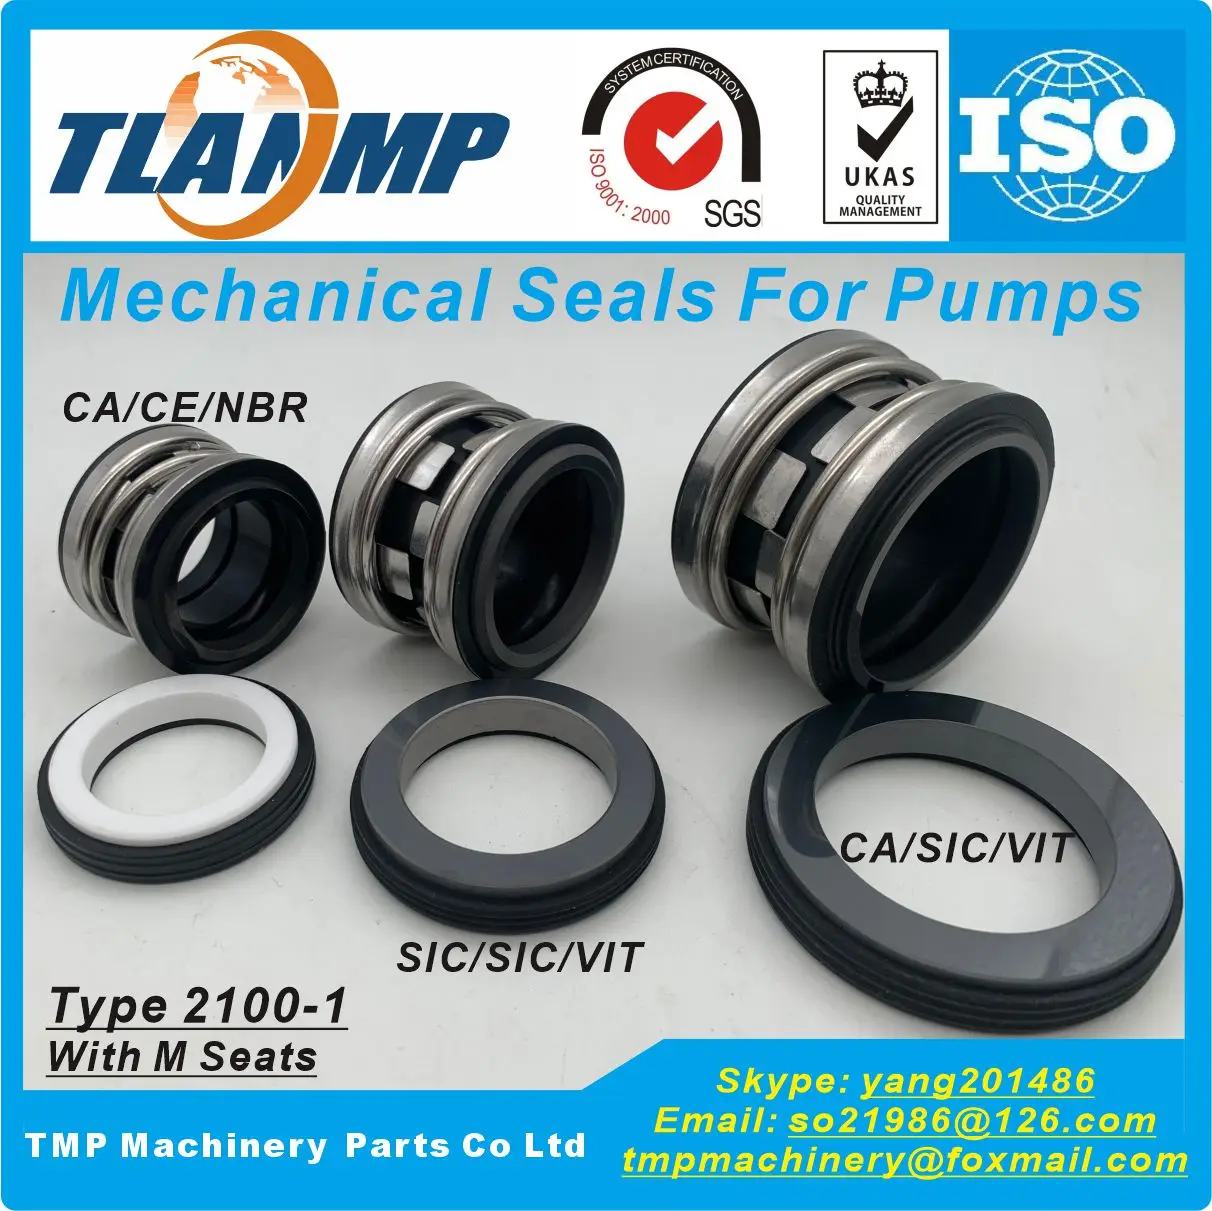 

2100-1-48 , TJ-0480-S , INT-0480-S , 2100S-48 , 2100-48 TLANMP Mechanical Seals (Shaft 48mm, Rotary Part Working length L3=30mm)